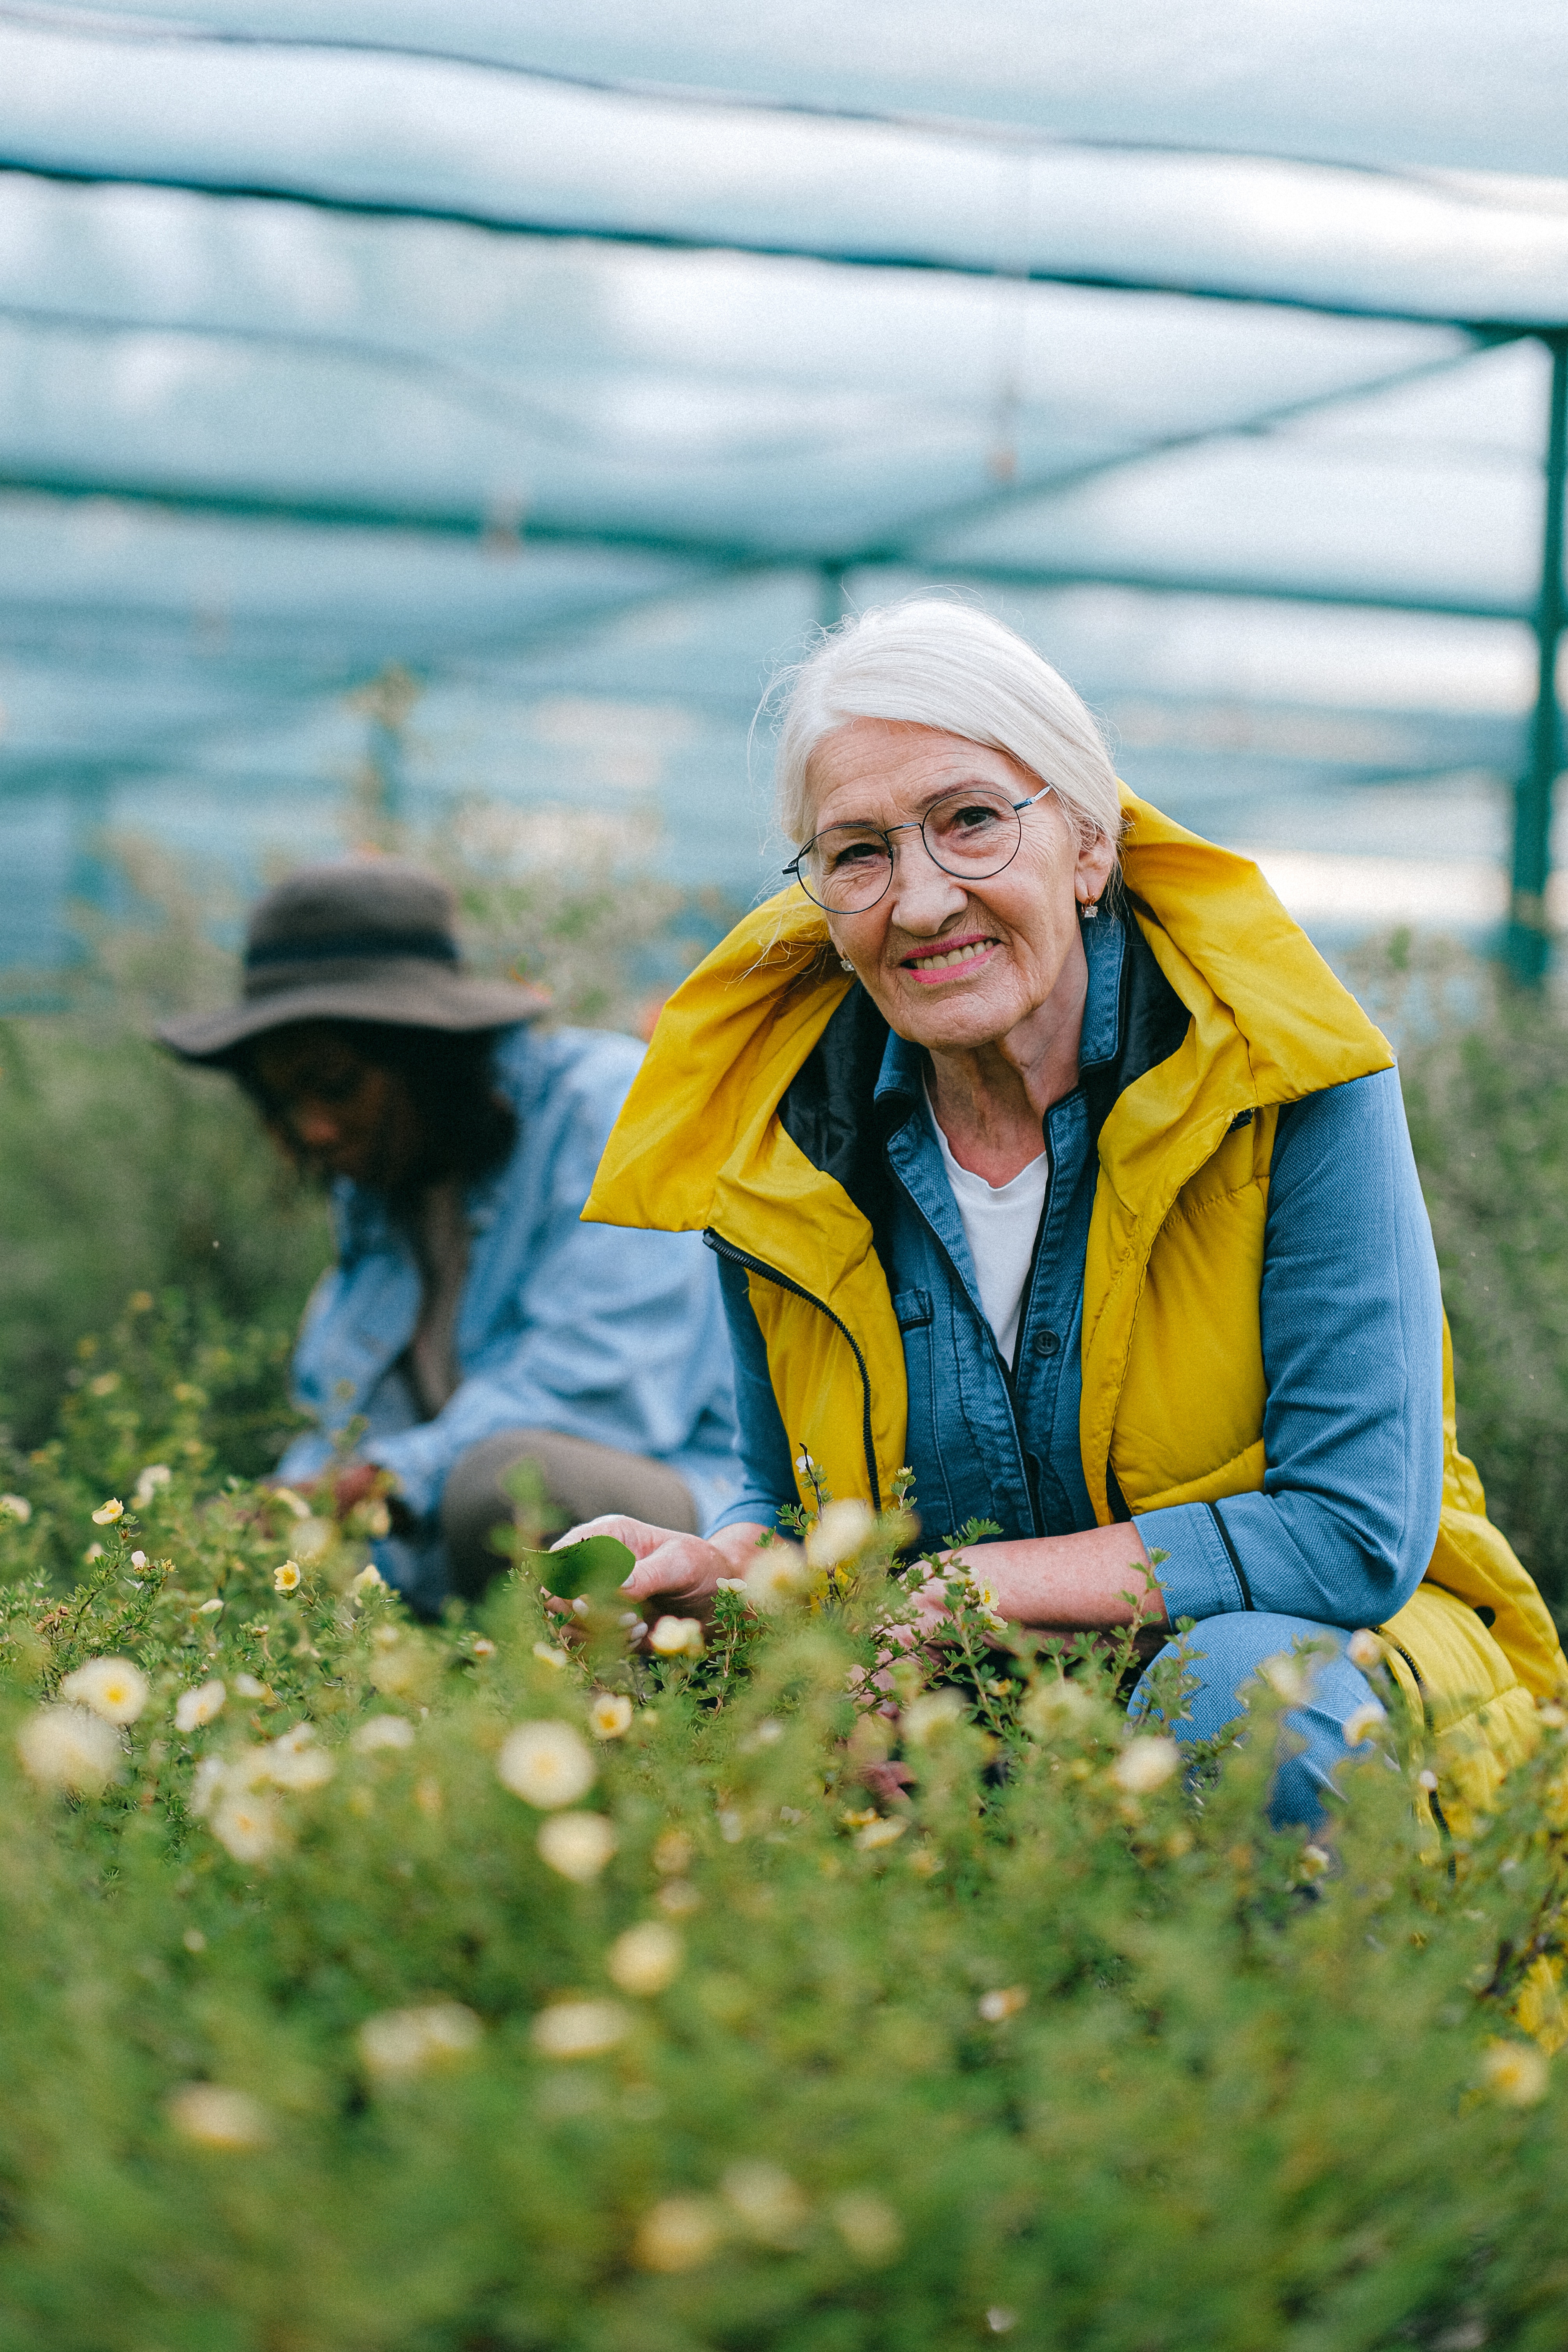 Gardening has several health benefits, such as reducing the risk of Alzheimer's (Pexels)